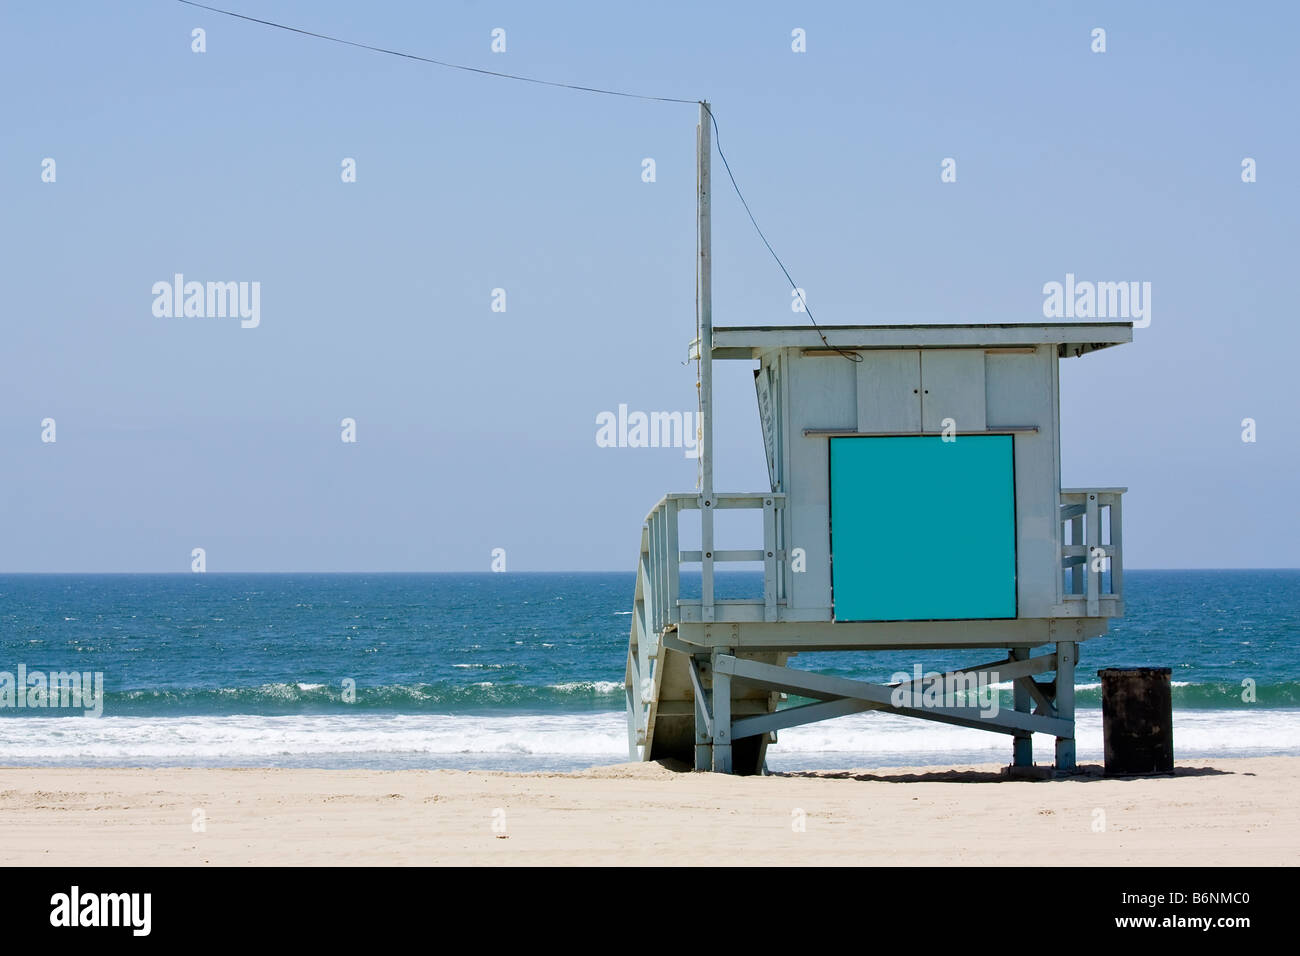 Lifeguard hut on the Malibu beach Blank panel on the front to write anything you want Stock Photo